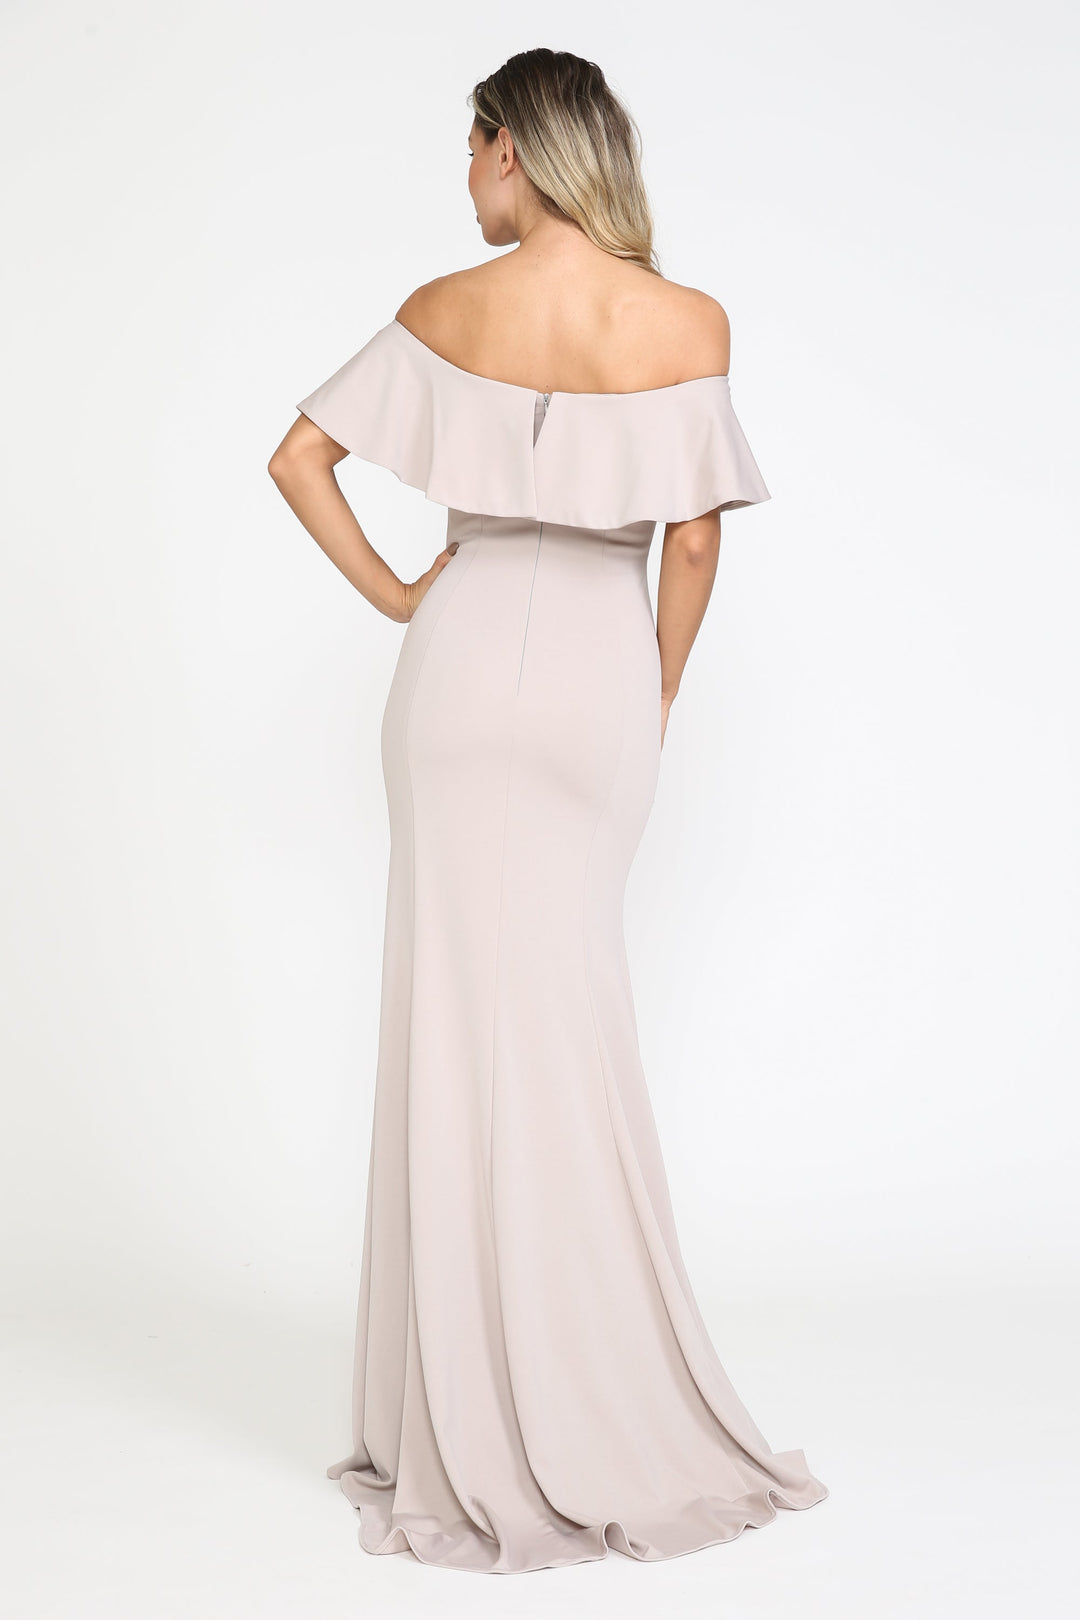 Fitted Long Ruffled Off Shoulder Dress by Poly USA 8146